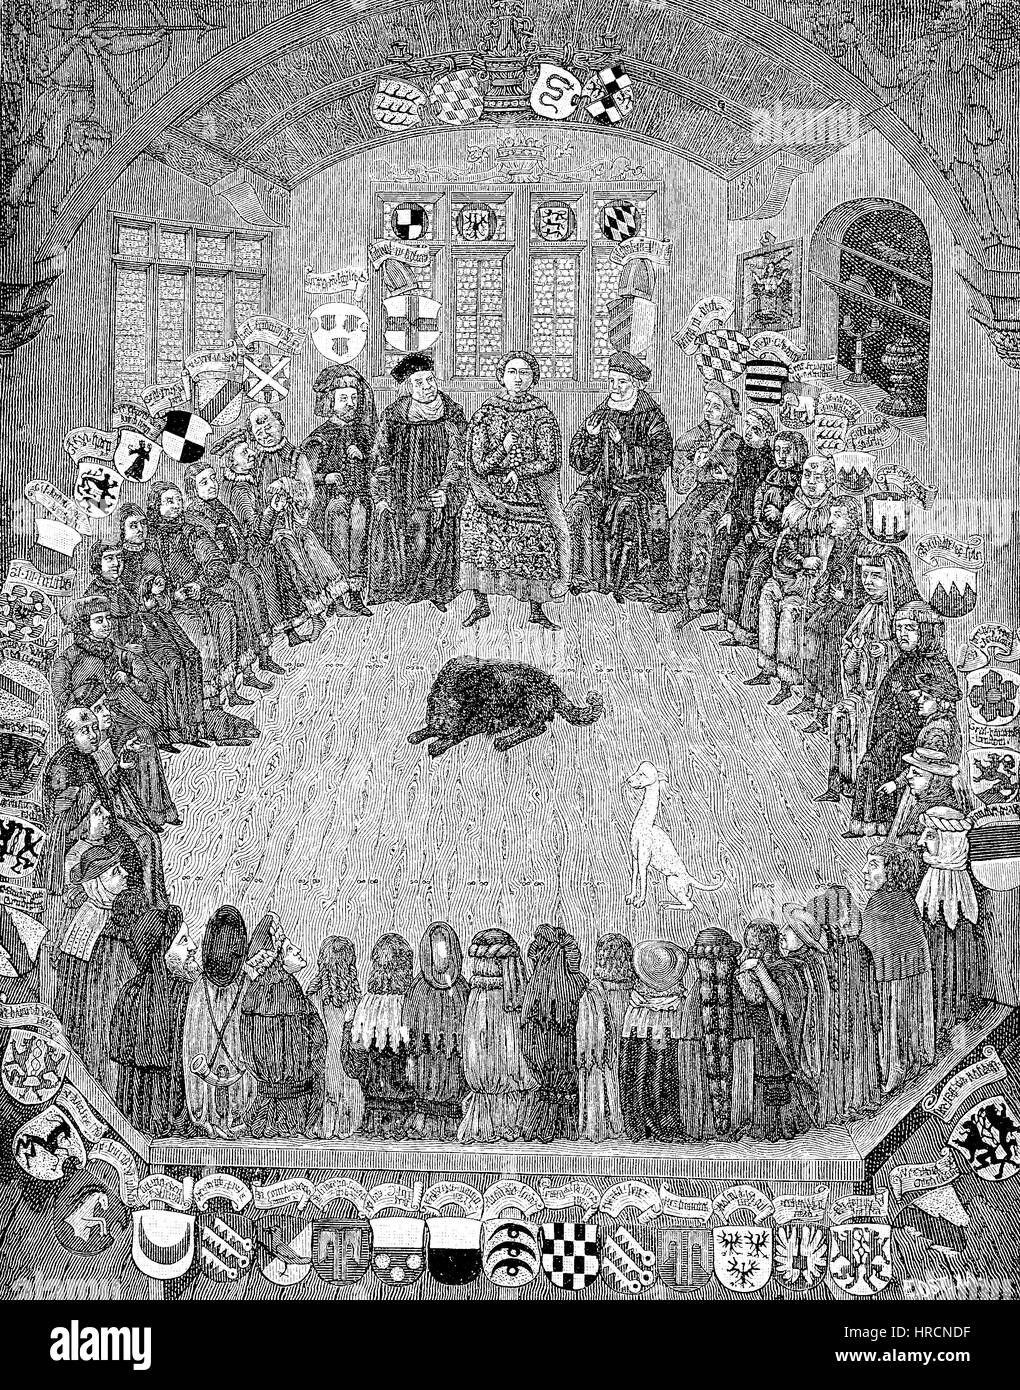 A meeting of the Swabian Circle, early 16th century, Germany. The Circle of Swabia or Swabian Circle, Schwaebischer Reichskreis, also Schwaebischer Kreis, was an Imperial Circle of the Holy Roman Empire established in 1500 on the territory of the former German stem-duchy of Swabia, reproduction of an woodcut from the 19th century, 1885 Stock Photo